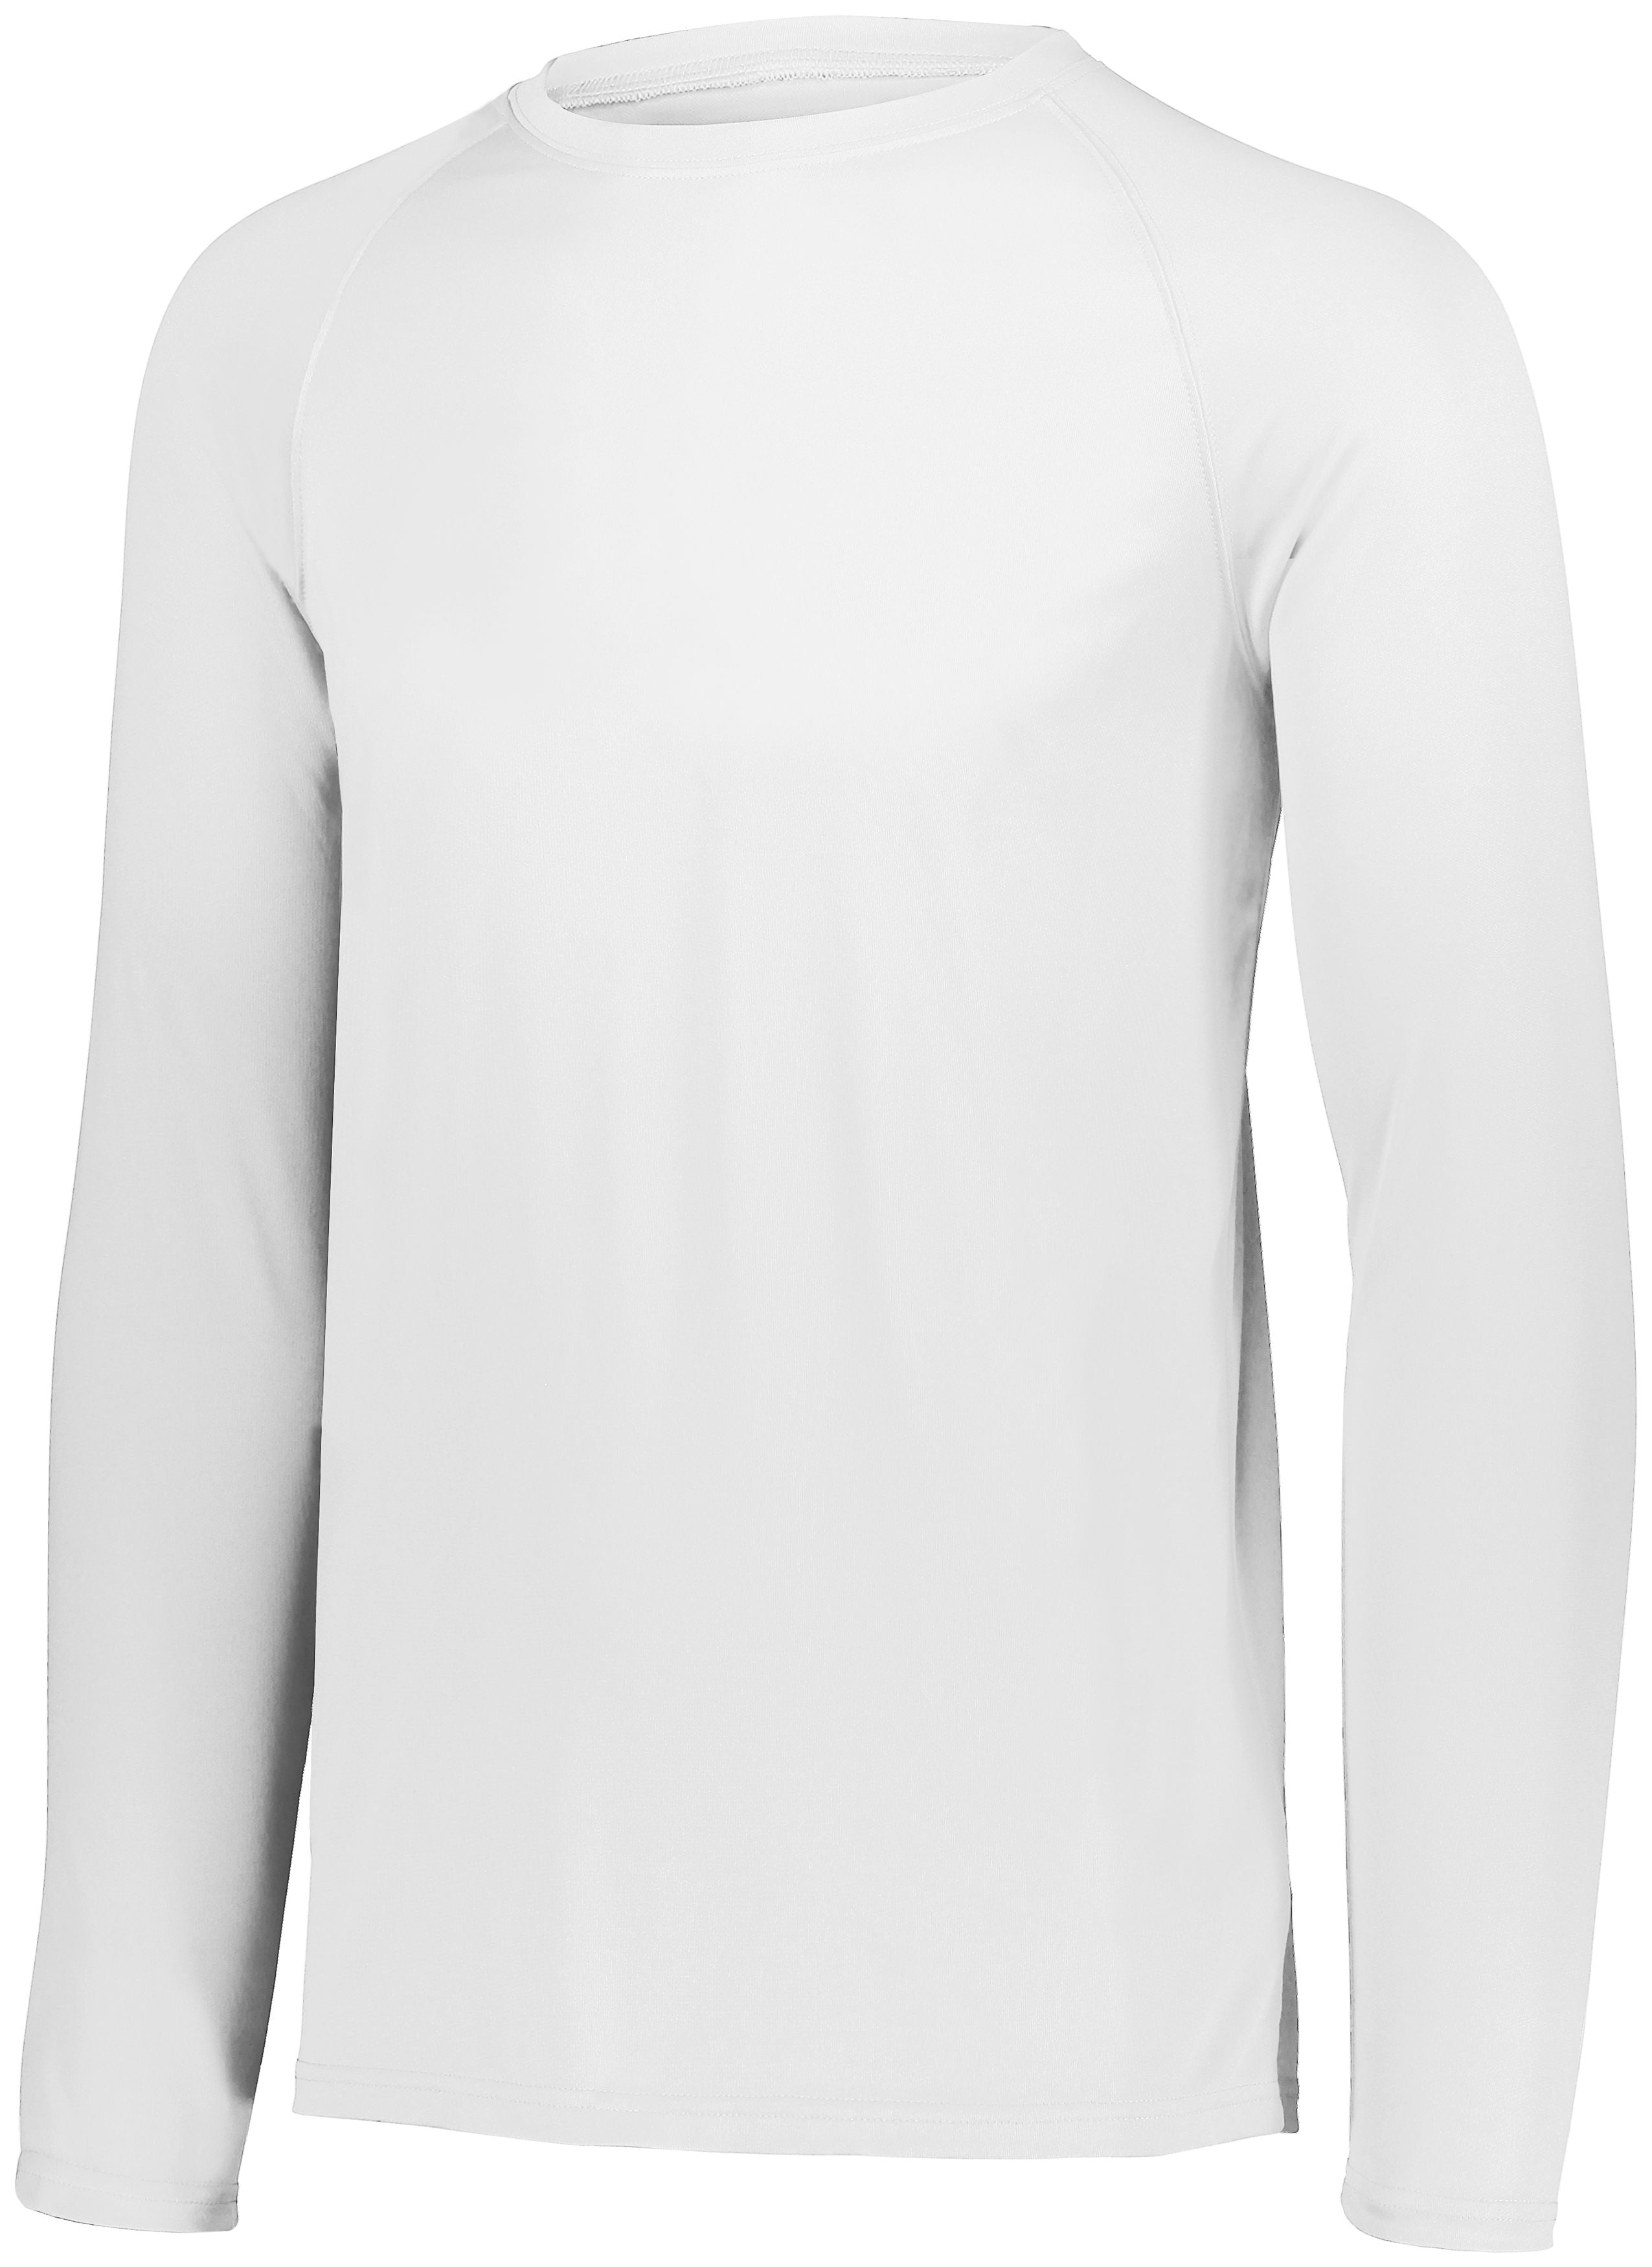 Augusta Sportswear Youth Attain Wicking Long Sleeve Tee in White  -Part of the Youth, Youth-Tee-Shirt, T-Shirts, Augusta-Products, Shirts product lines at KanaleyCreations.com